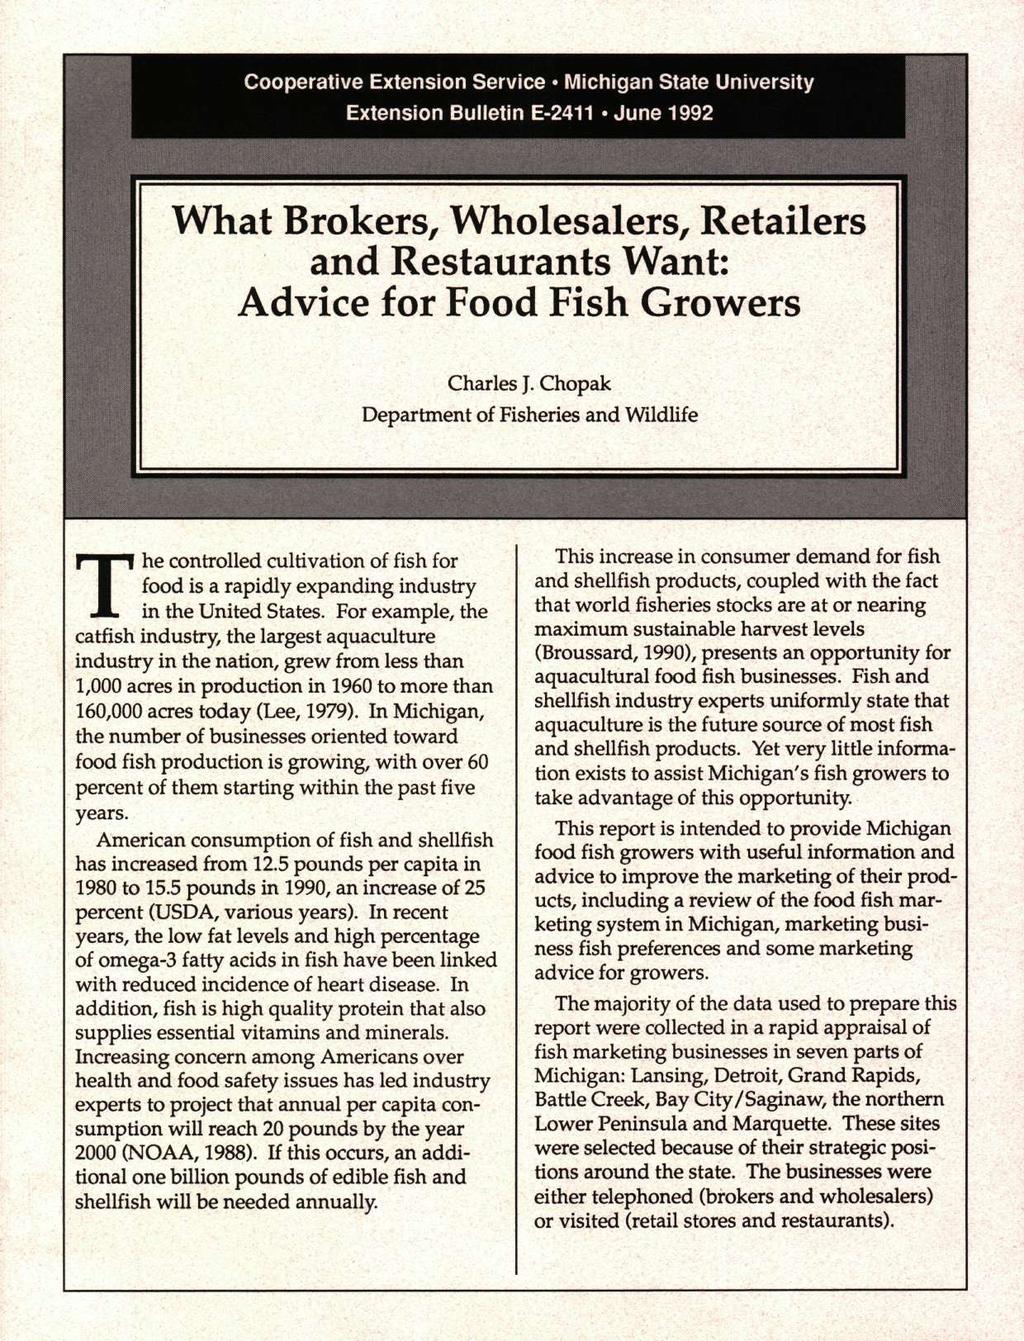 Cooperative Extension Service Michigan State University Extension Bulletin E-2411 June 1992 What Brokers, Wholesalers, Retailers and Restaurants Want: Advice for Food Fish Growers Charles J.